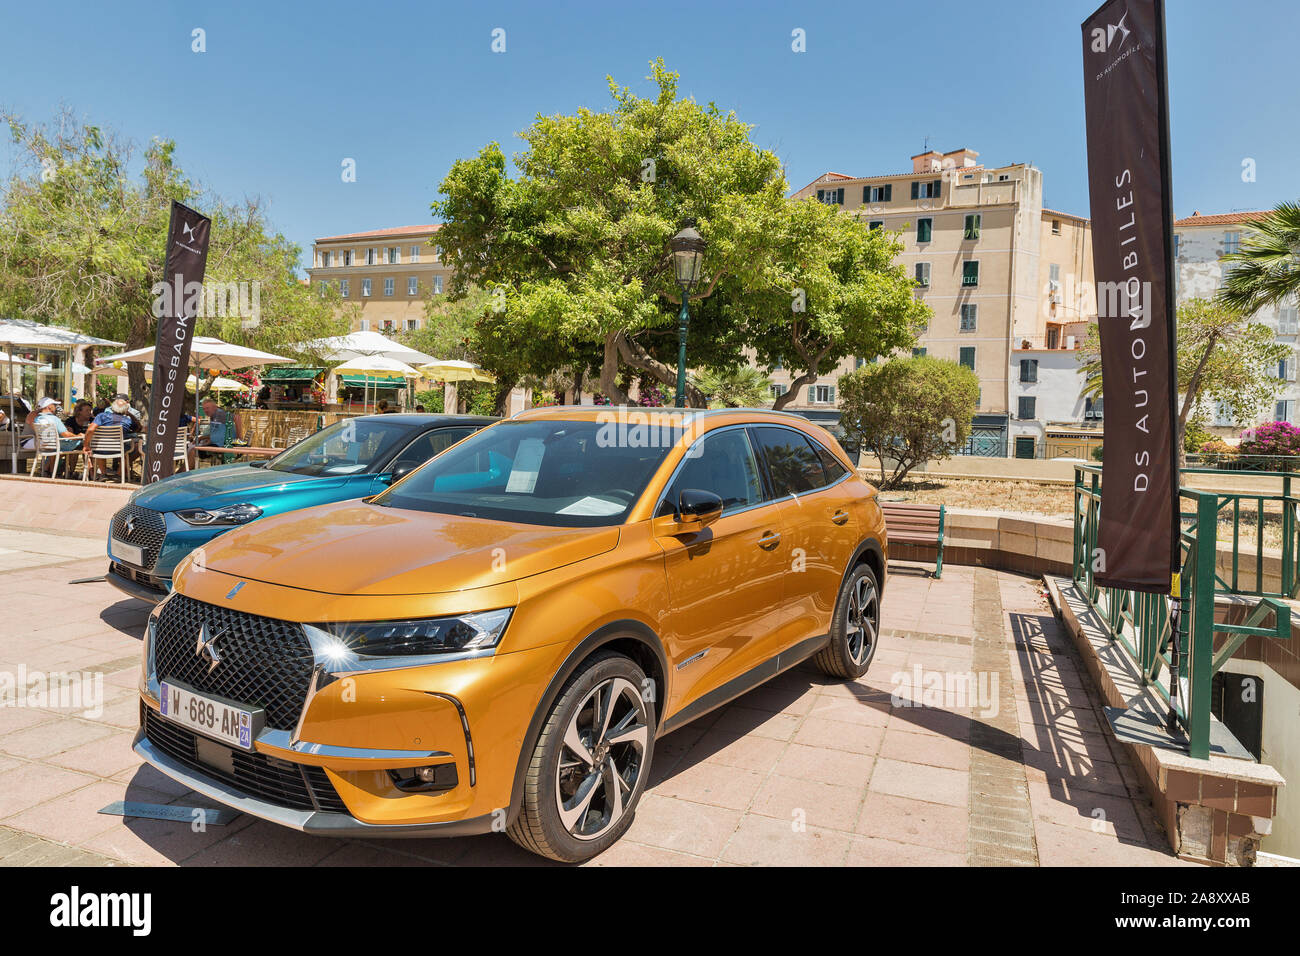 AJACCIO, CORSICA, FRANCE - JULY 13, 2019: Citroen DS7 and DS3 Crossback cars showcased on General de Gaulle square. Ajaccio is a largest settlement on Stock Photo